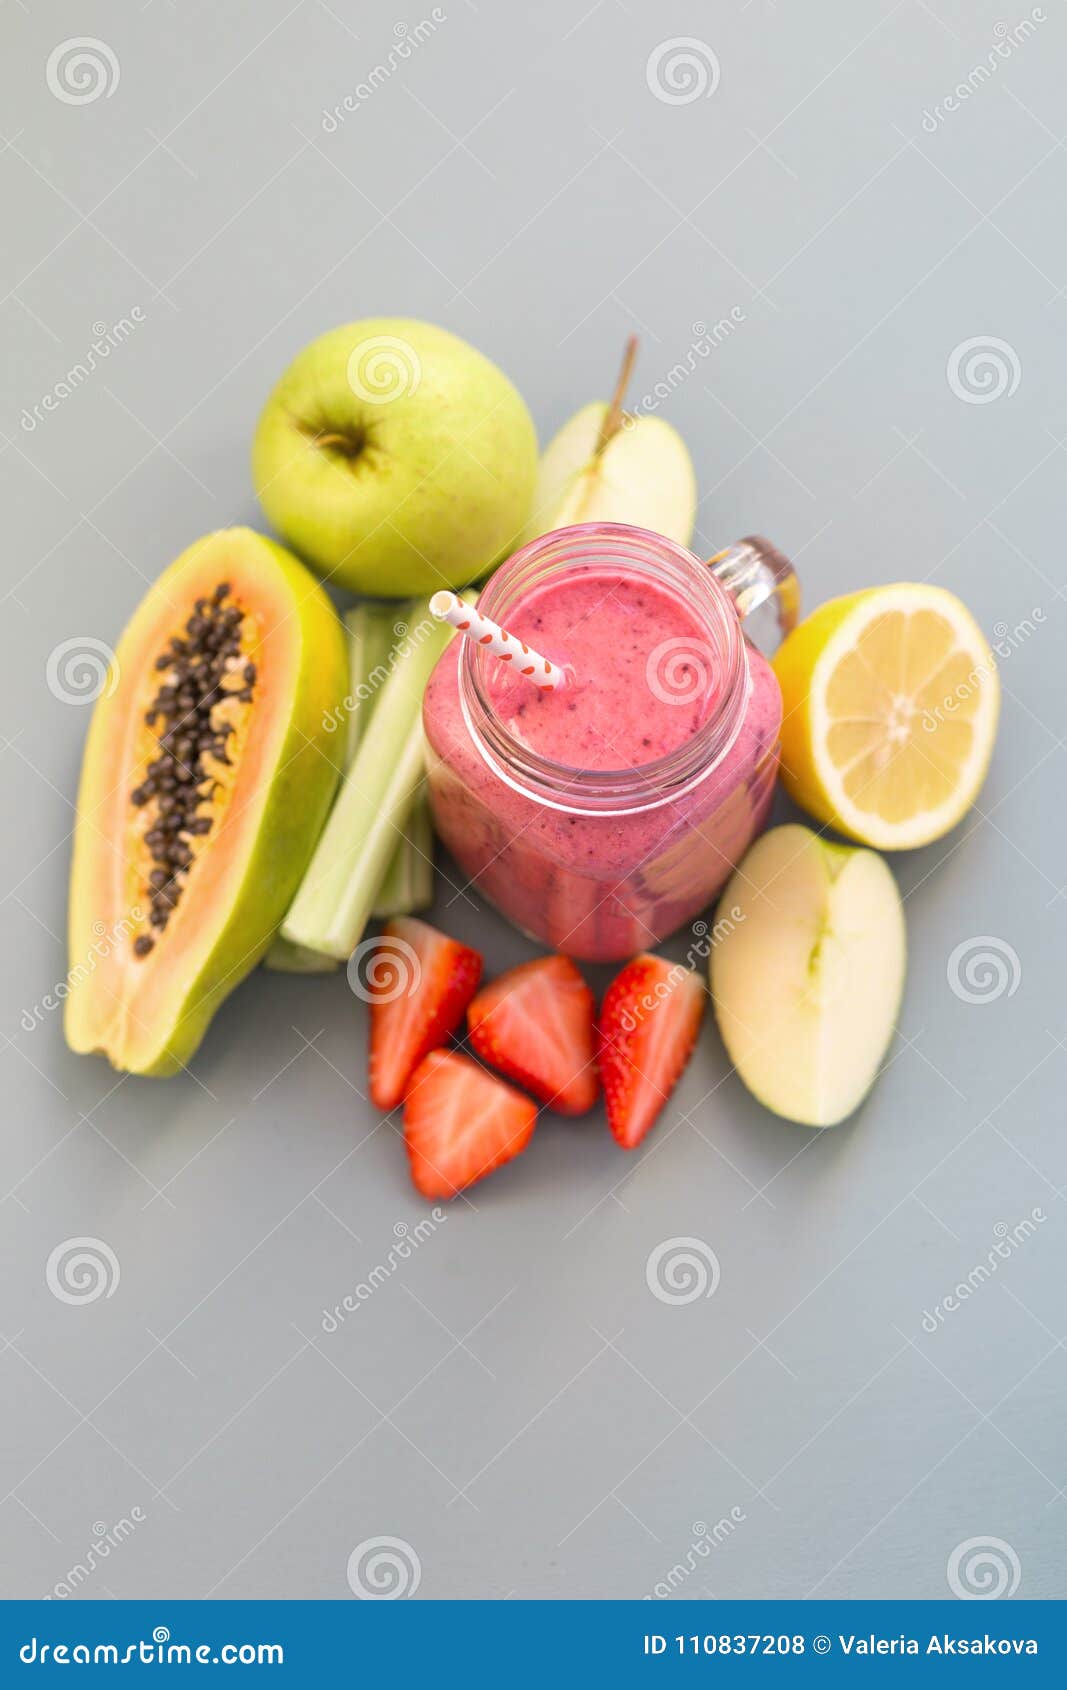 Fresh fruits and smoothie. Drinking jar with tasty smoothie and fresh juicy fruits.